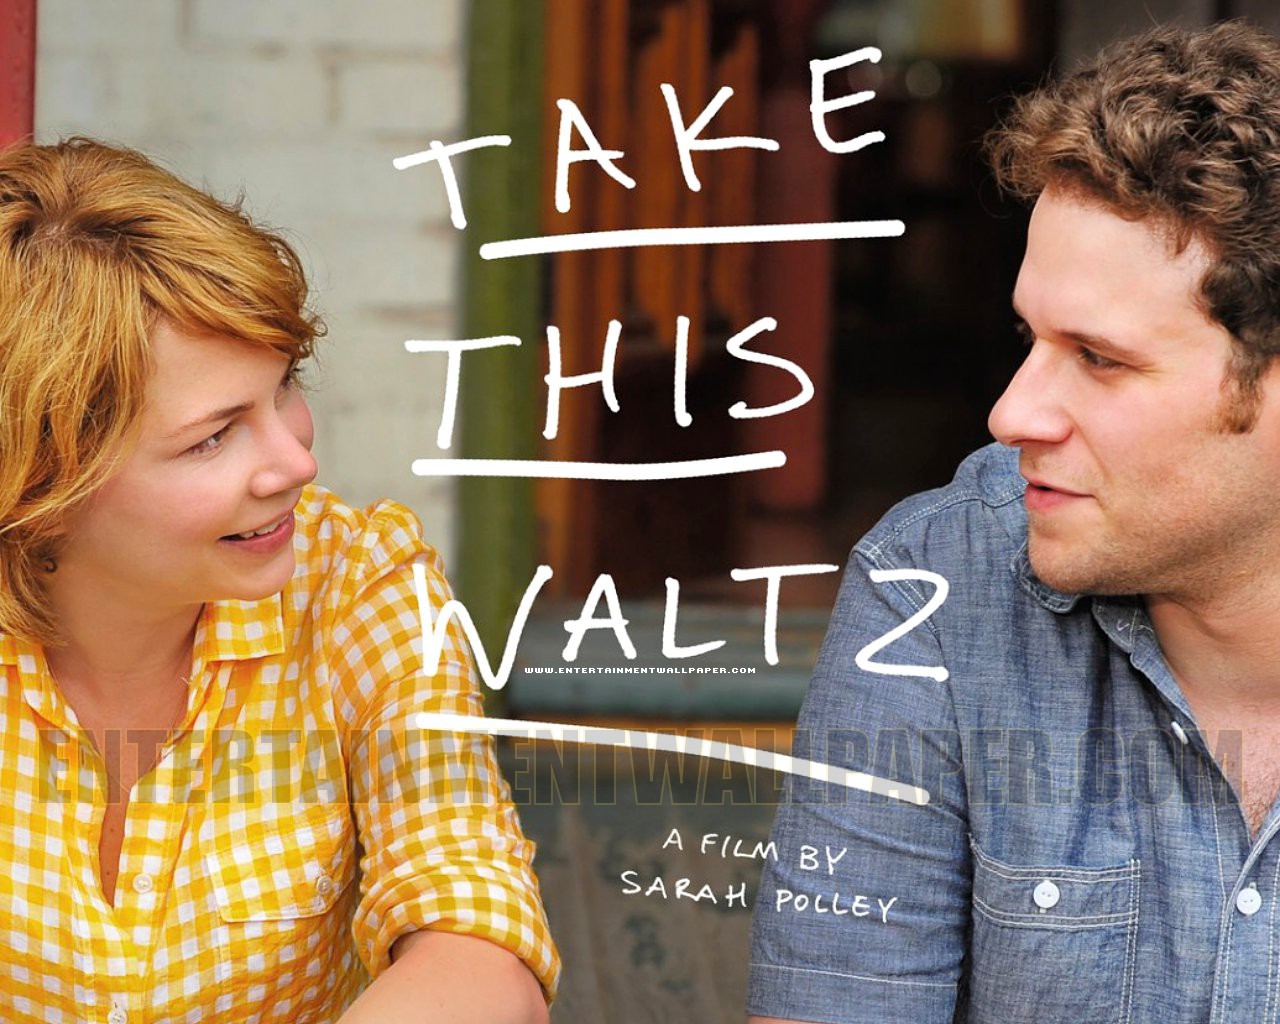 TAKE THIS WALTZ Available Blu-ray/DVD Oct 23rd